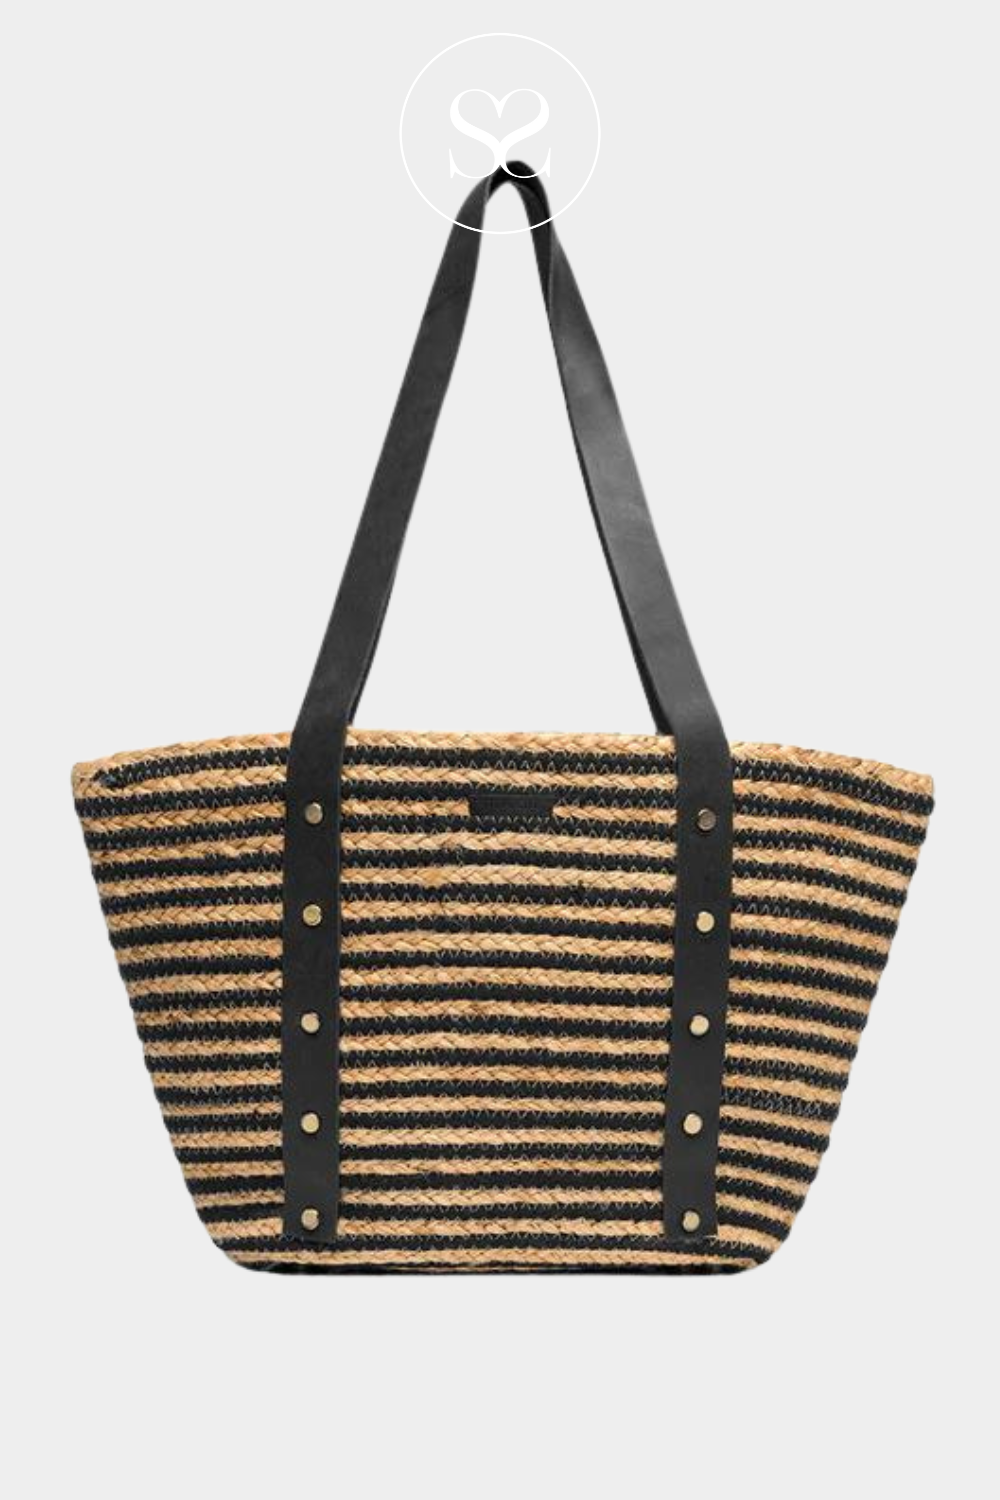 DEPECHE 16096 BLACK AND NATURAL  STRIPE SHOPPER/BEACH BAG WITH LEATHER STRAP